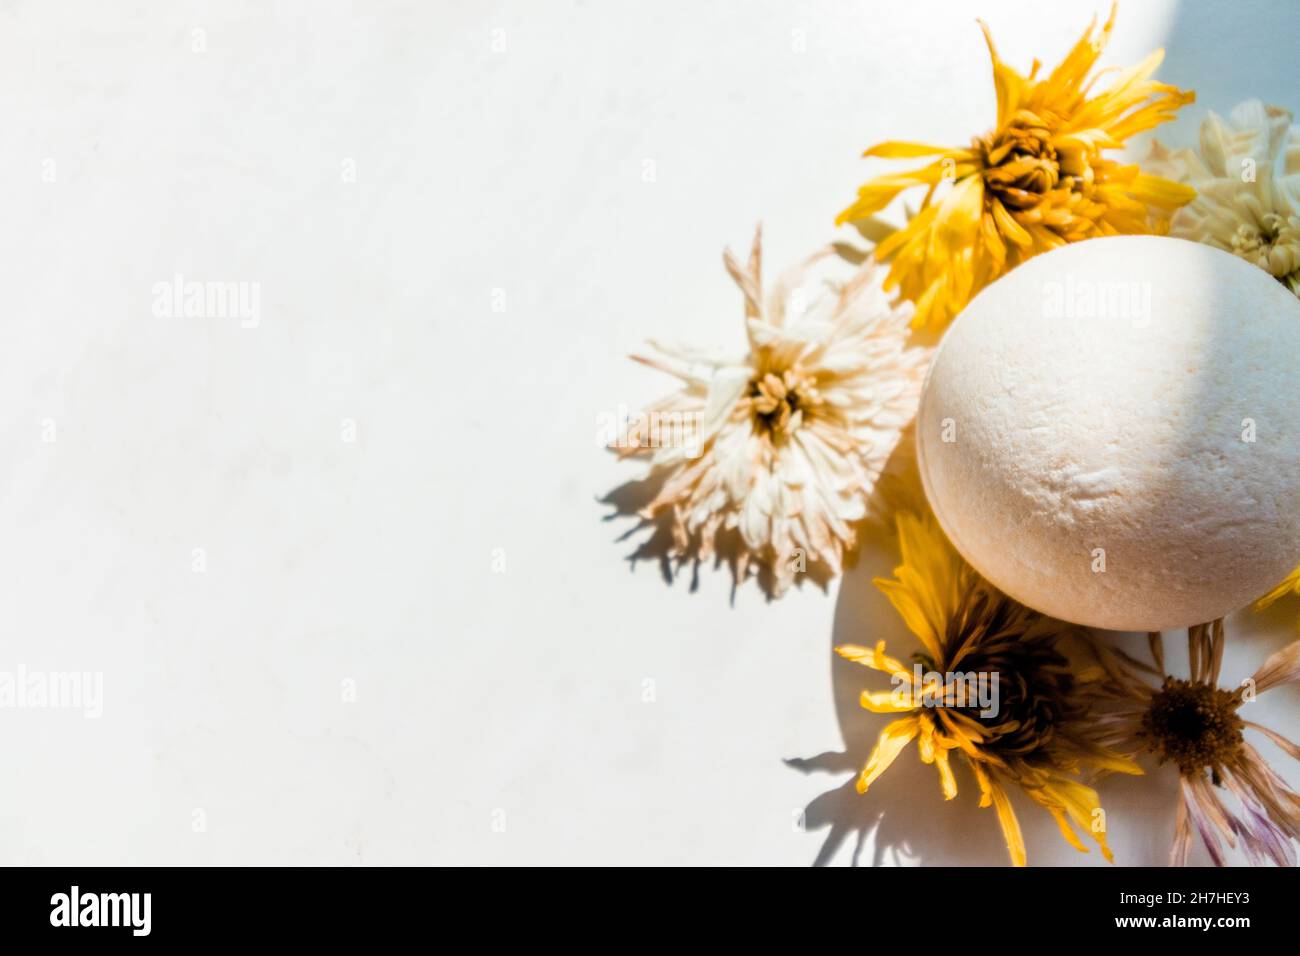 White bath bomb among dried flowers on a white background.  Stock Photo